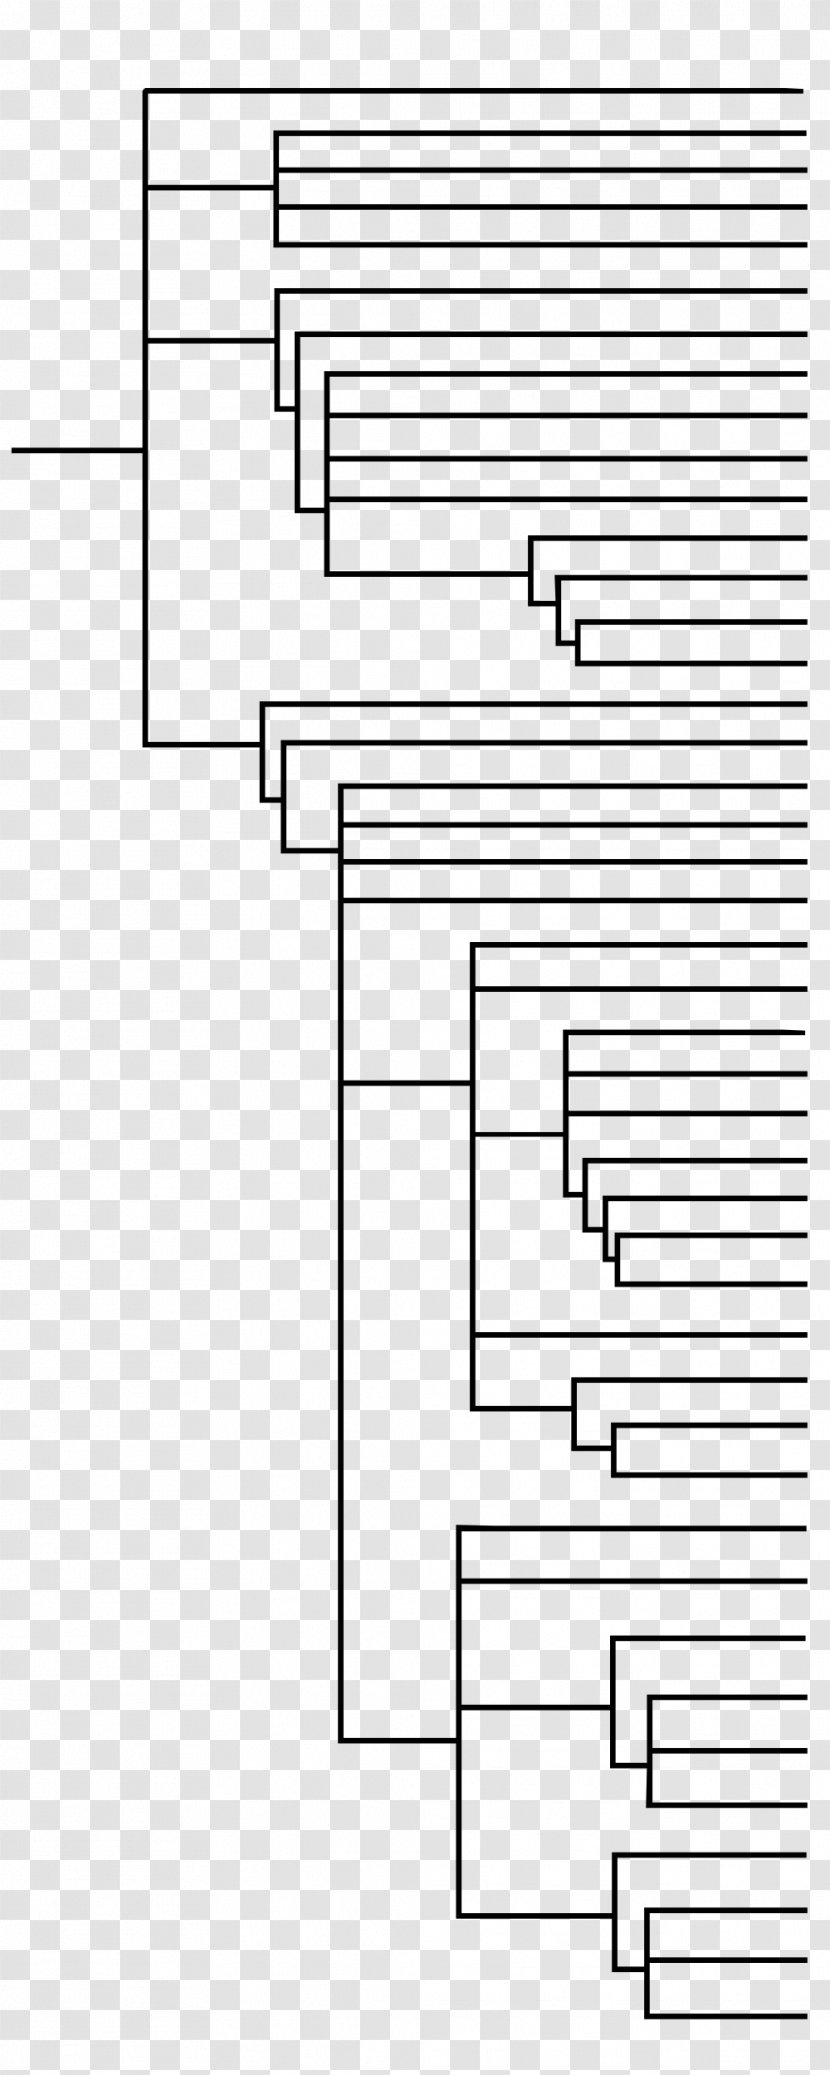 APG II System Angiosperm Phylogeny Group III Cladogram - Tree - Cartoon Transparent PNG